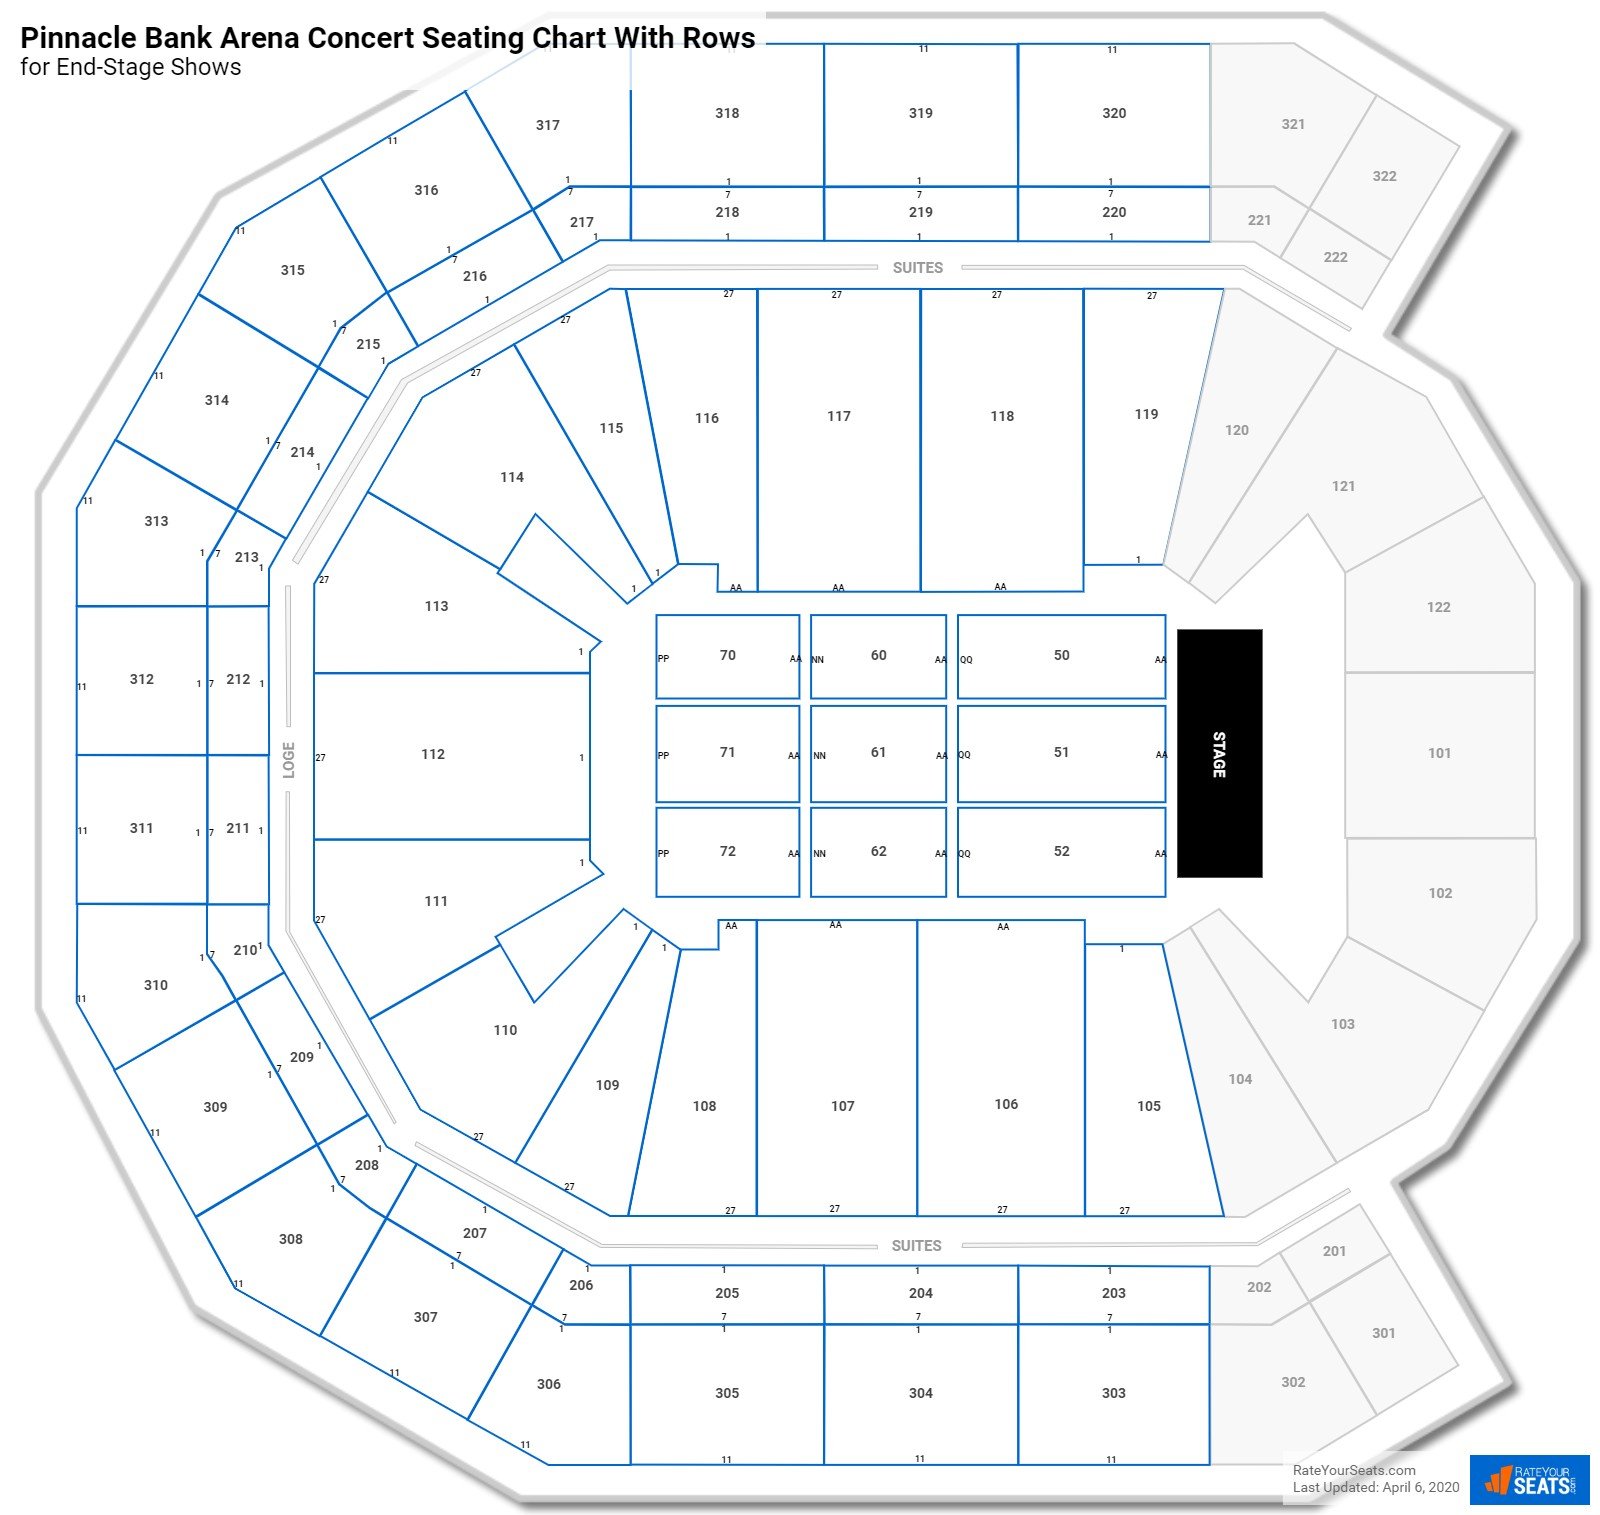 Pinnacle Bank Arena seating chart with row numbers